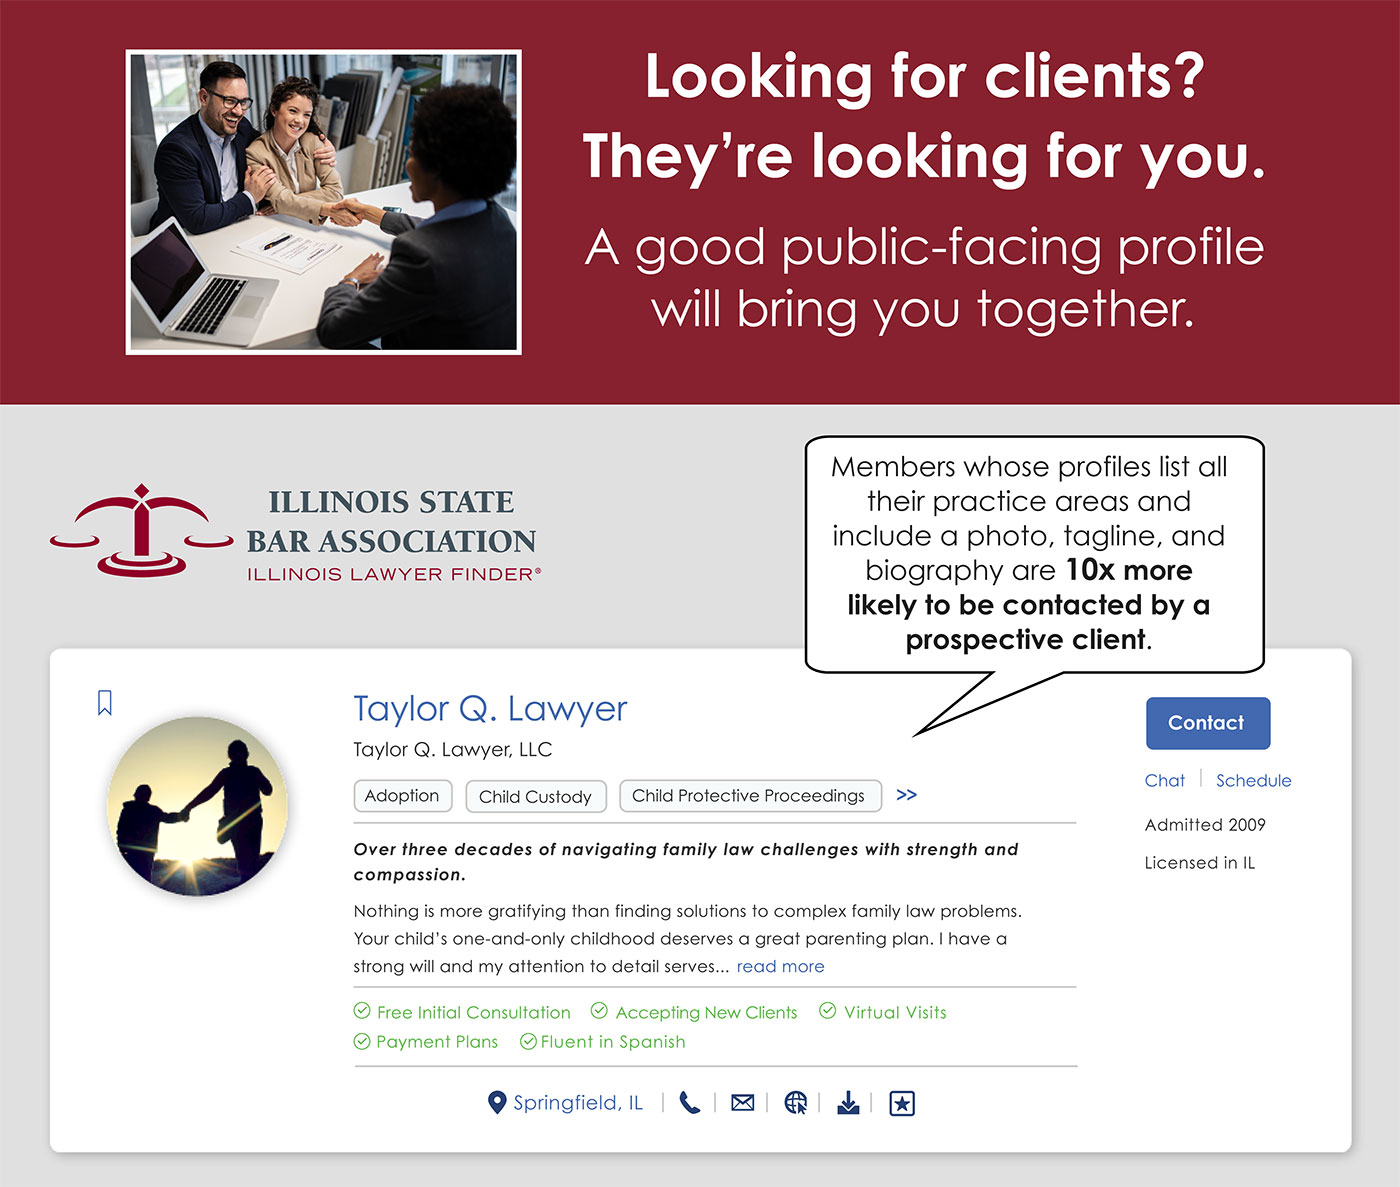 Looking for clients? They're looking for you. A good public-facing profile will bring you together. 